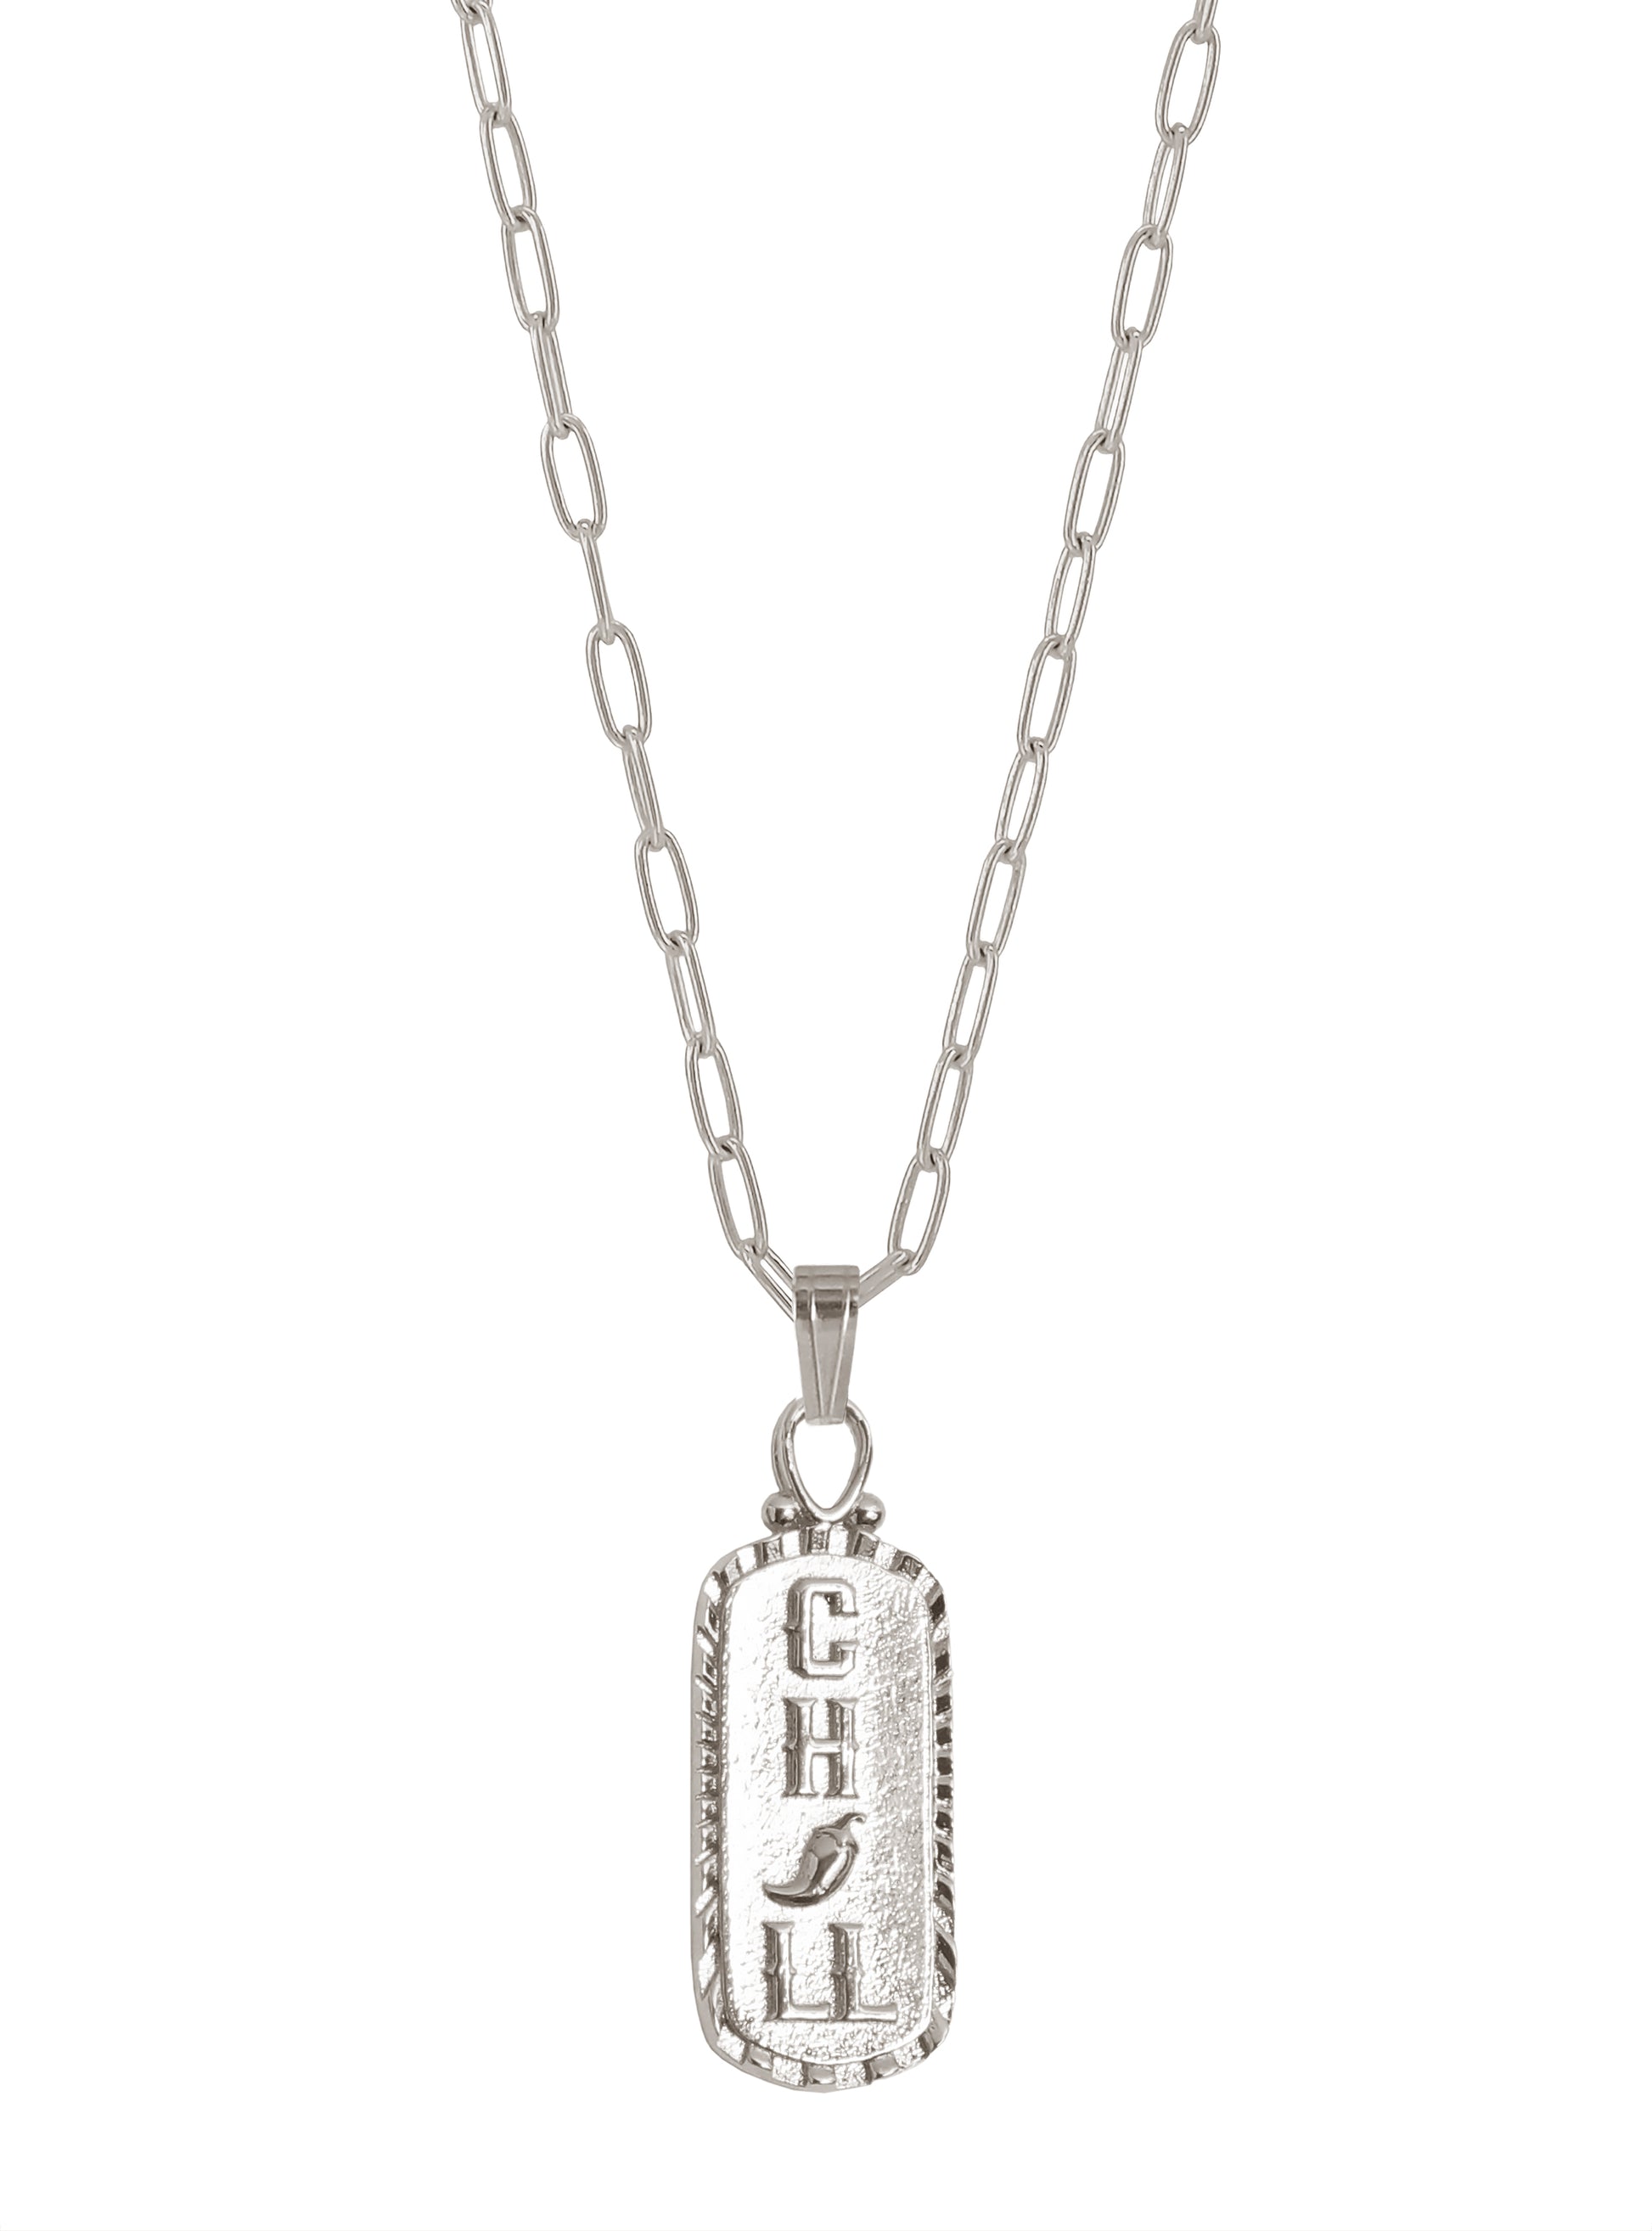 Chill Talisman Necklace, 925 Sterling Silver, Gender Neutral